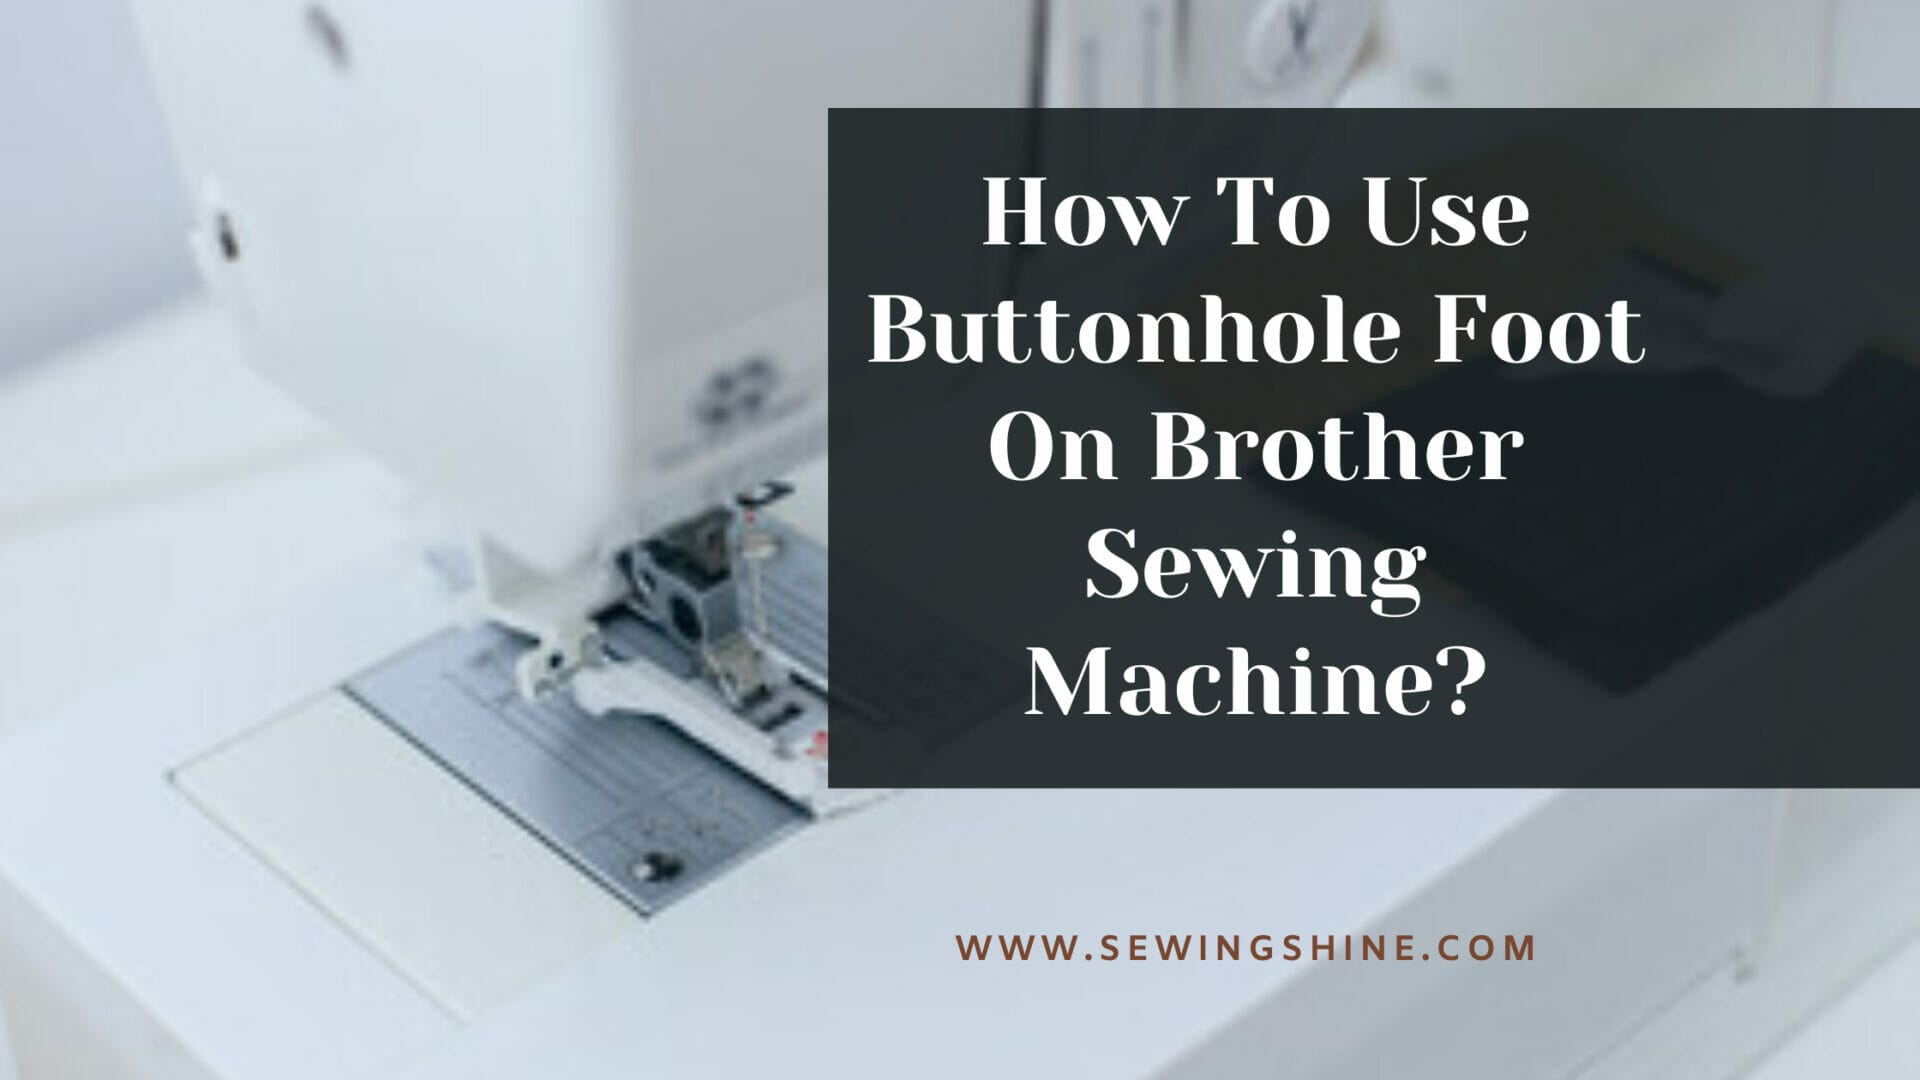 How To Use Buttonhole Foot On Brother Sewing Machine